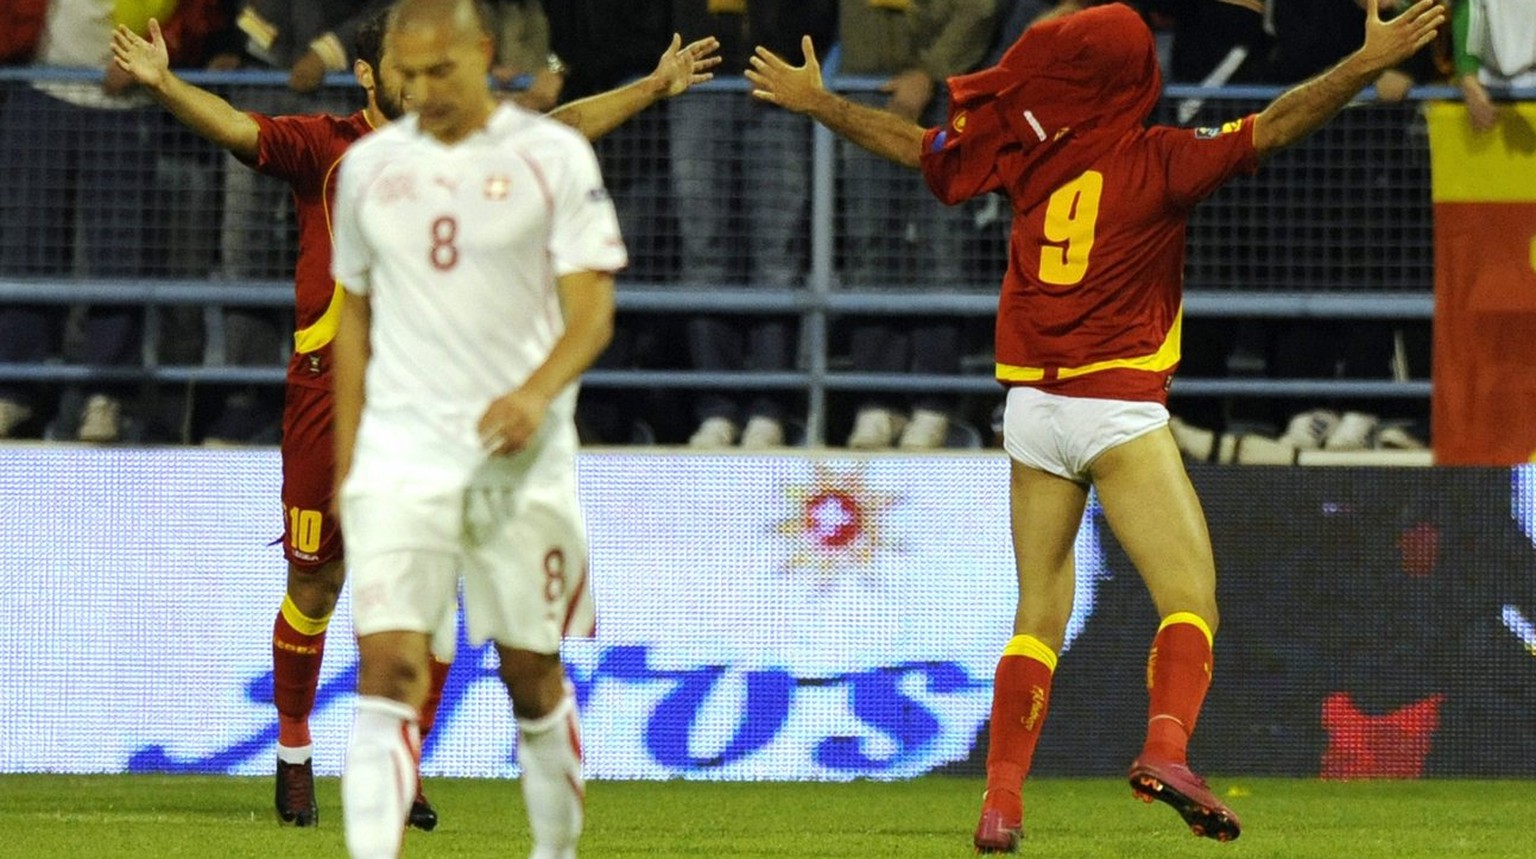 Montenegro forward Mirko Vucinic, right, celebrates the first goal in front of Swiss midfielder Goekhan Inler, left, during the Euro 2012 group G qualification soccer match between Switzerland and Mon ...